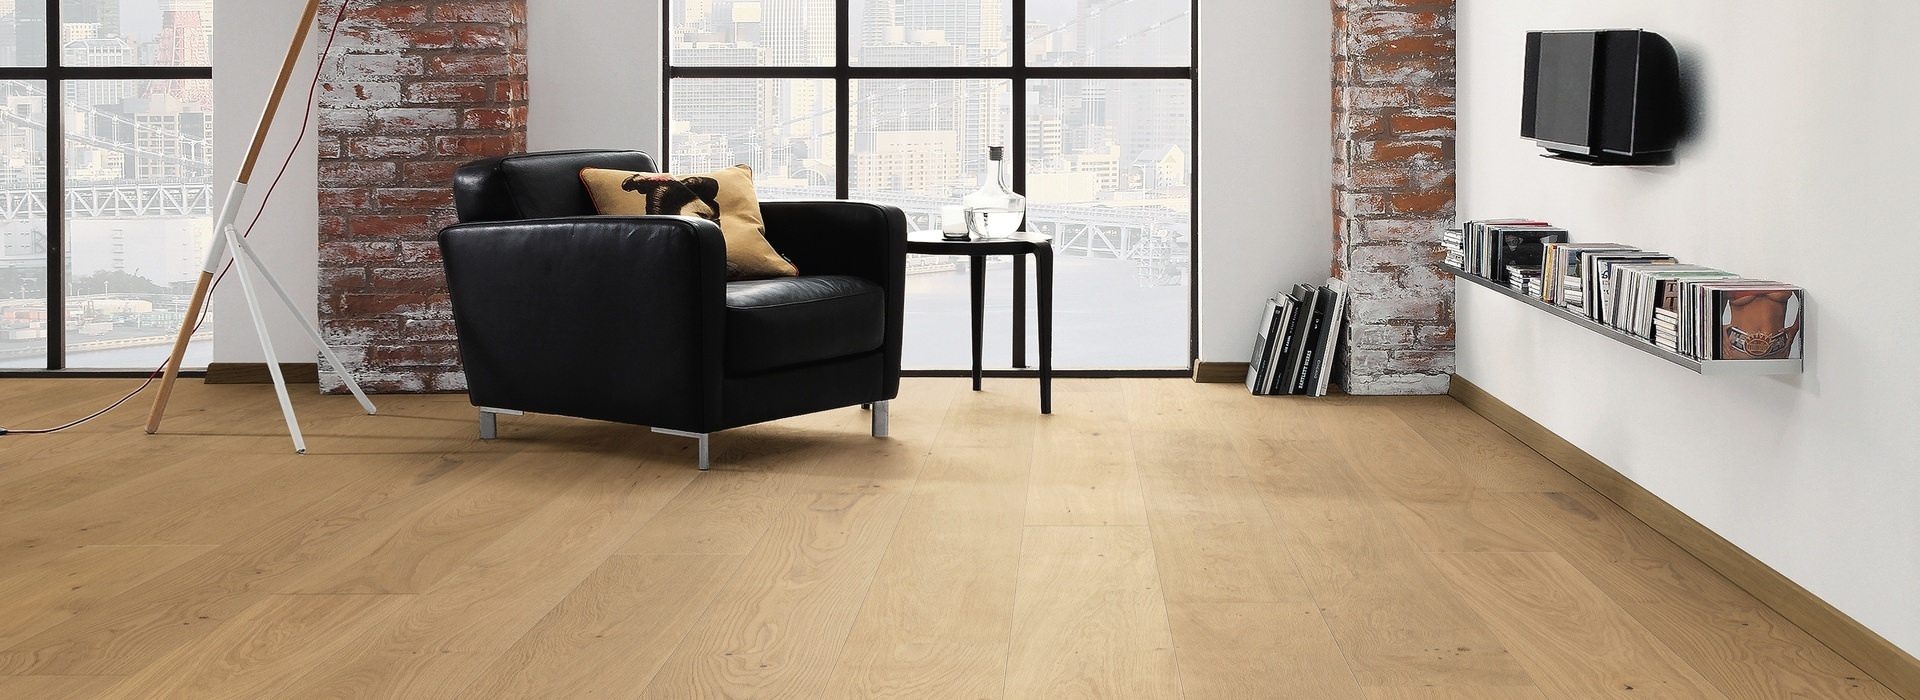 HARO PARQUET 4000 Plank 1-Strip Plaza 240 4V Oak Invisible Markant brushed naturaLin plus Top Connect